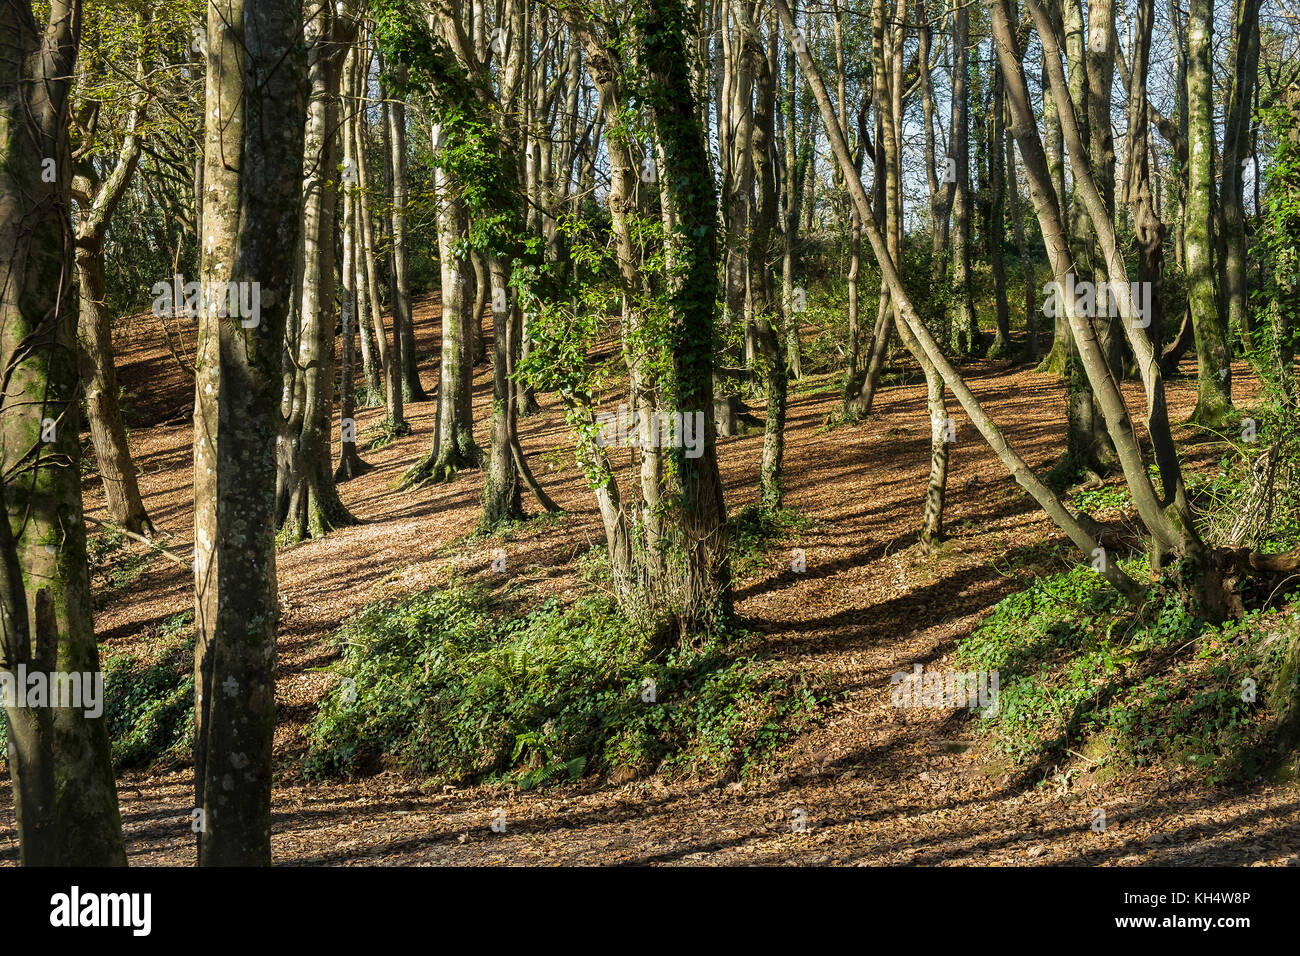 Autumn in Tehidy Country Park Cornwall UK. Stock Photo